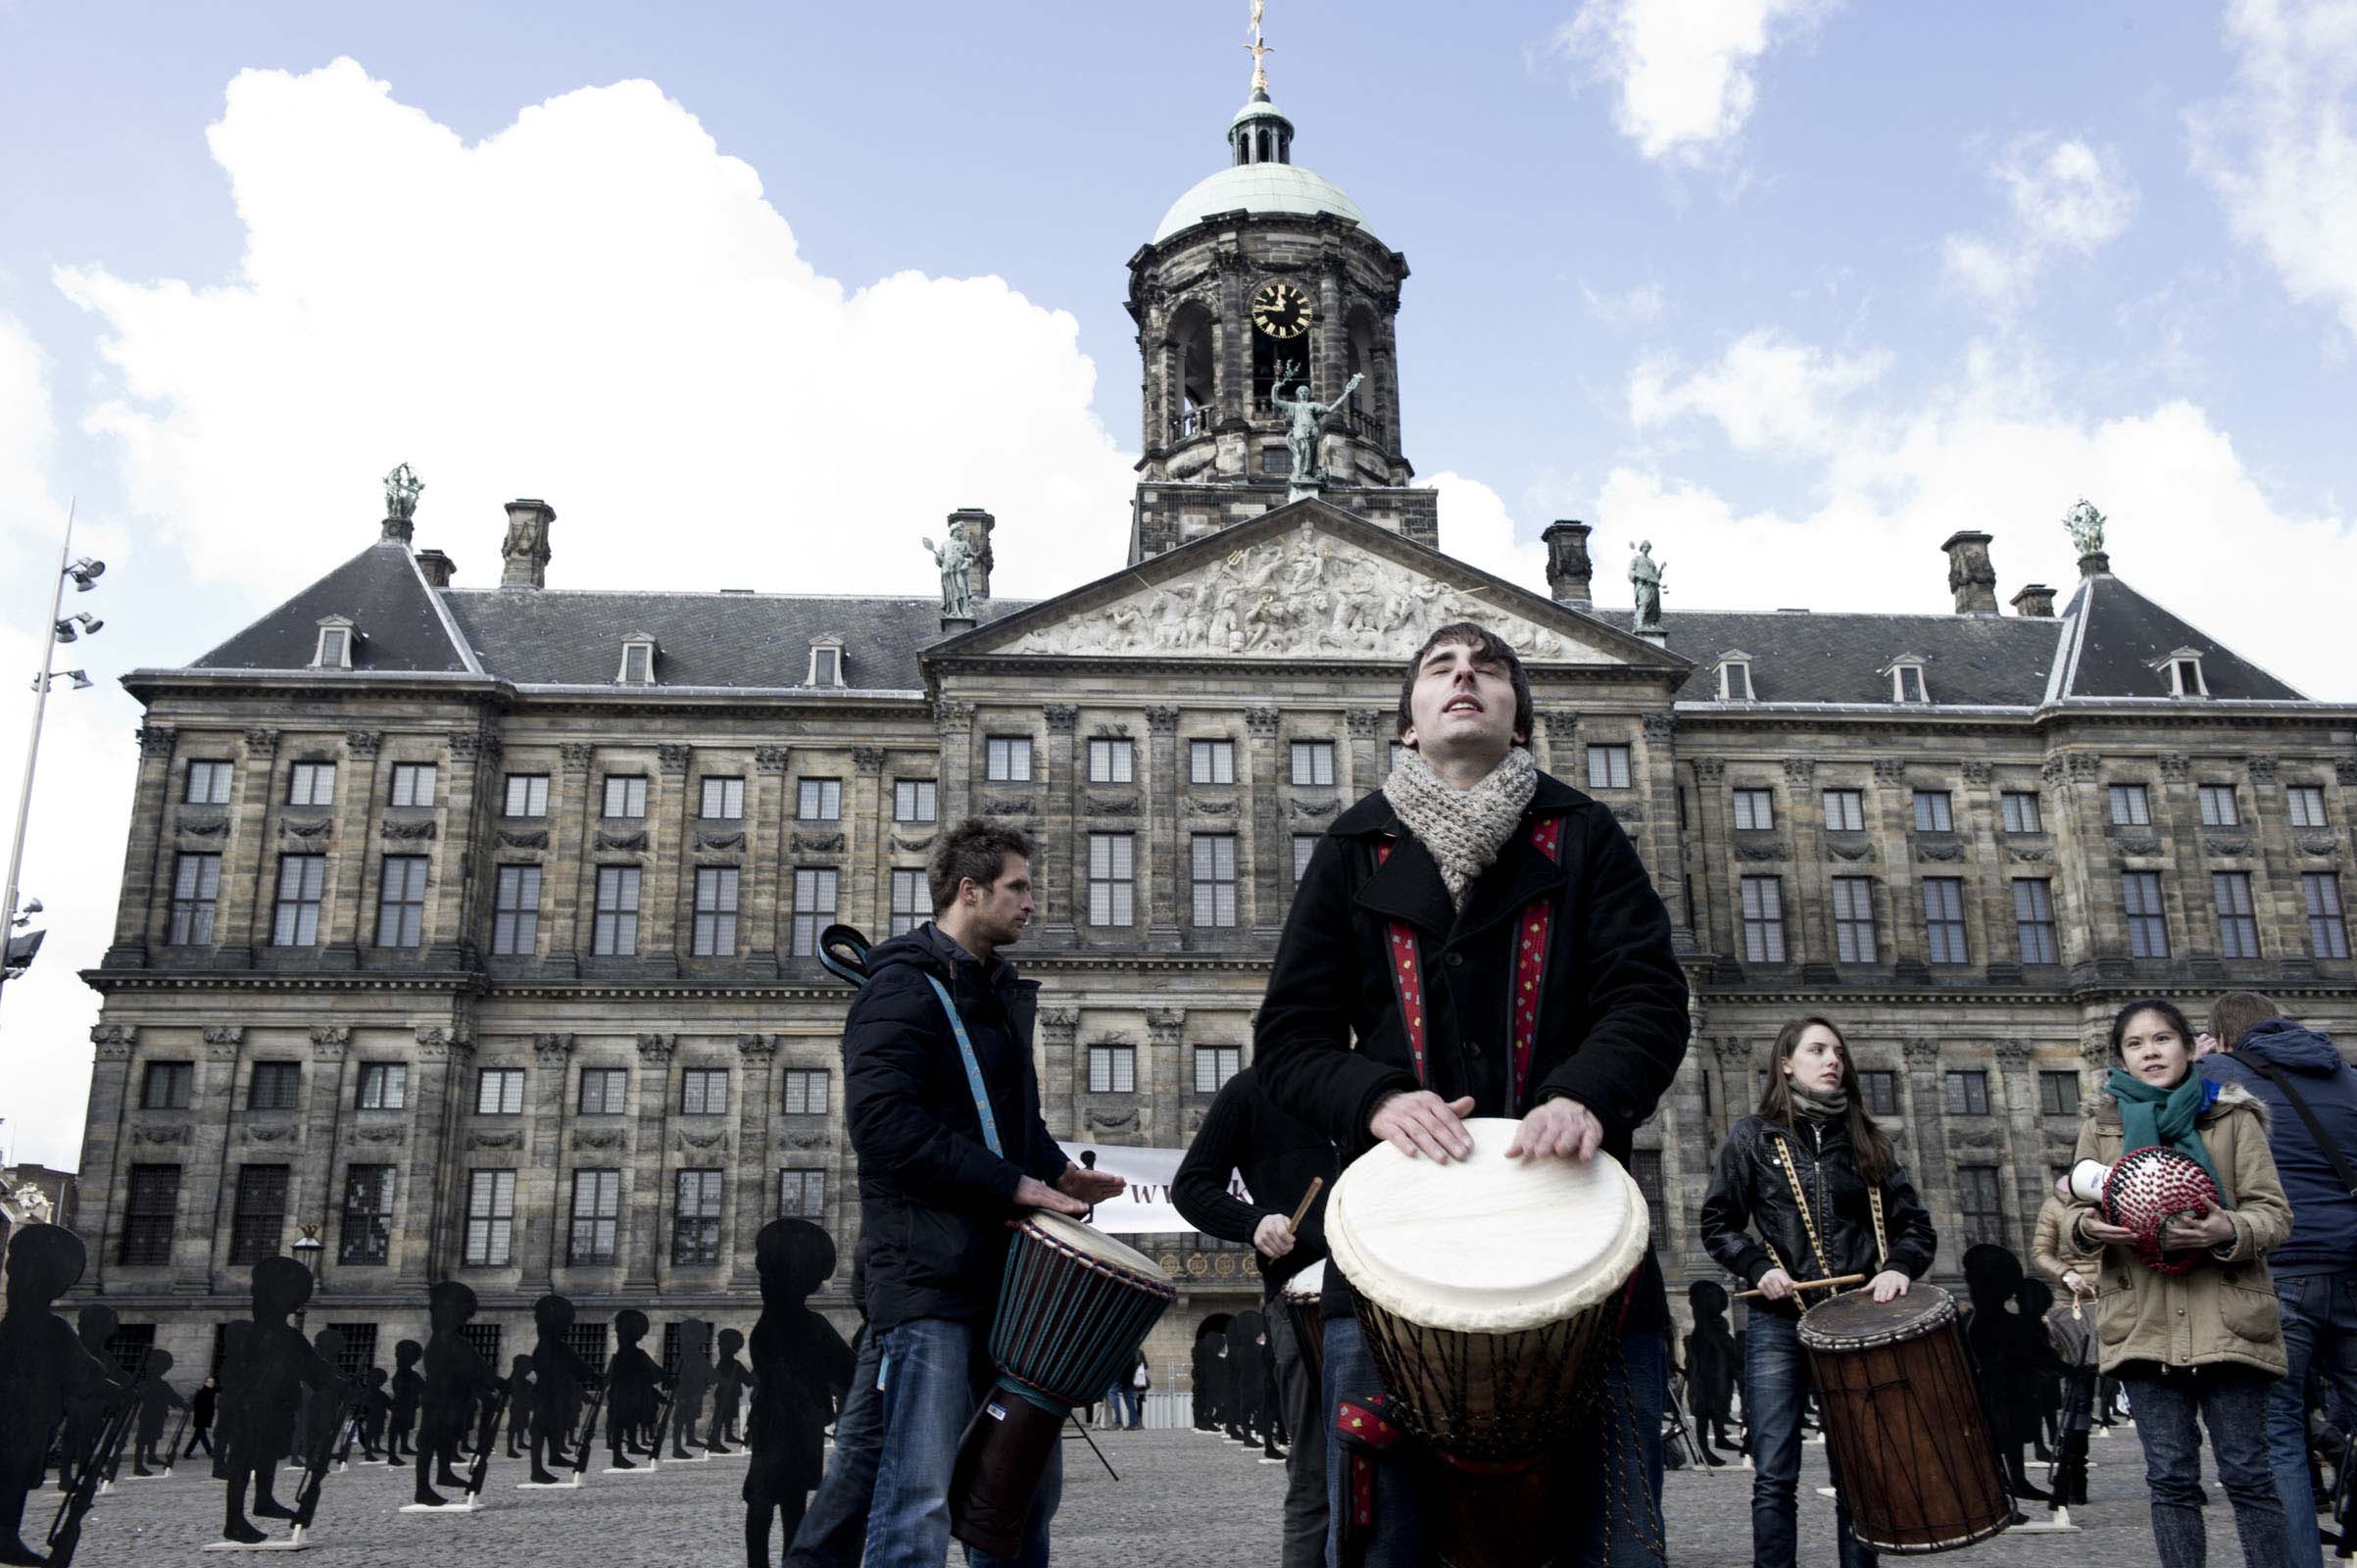 Dominique Vleeshouwers and percussionists playing on the Dam square in Amsterdam